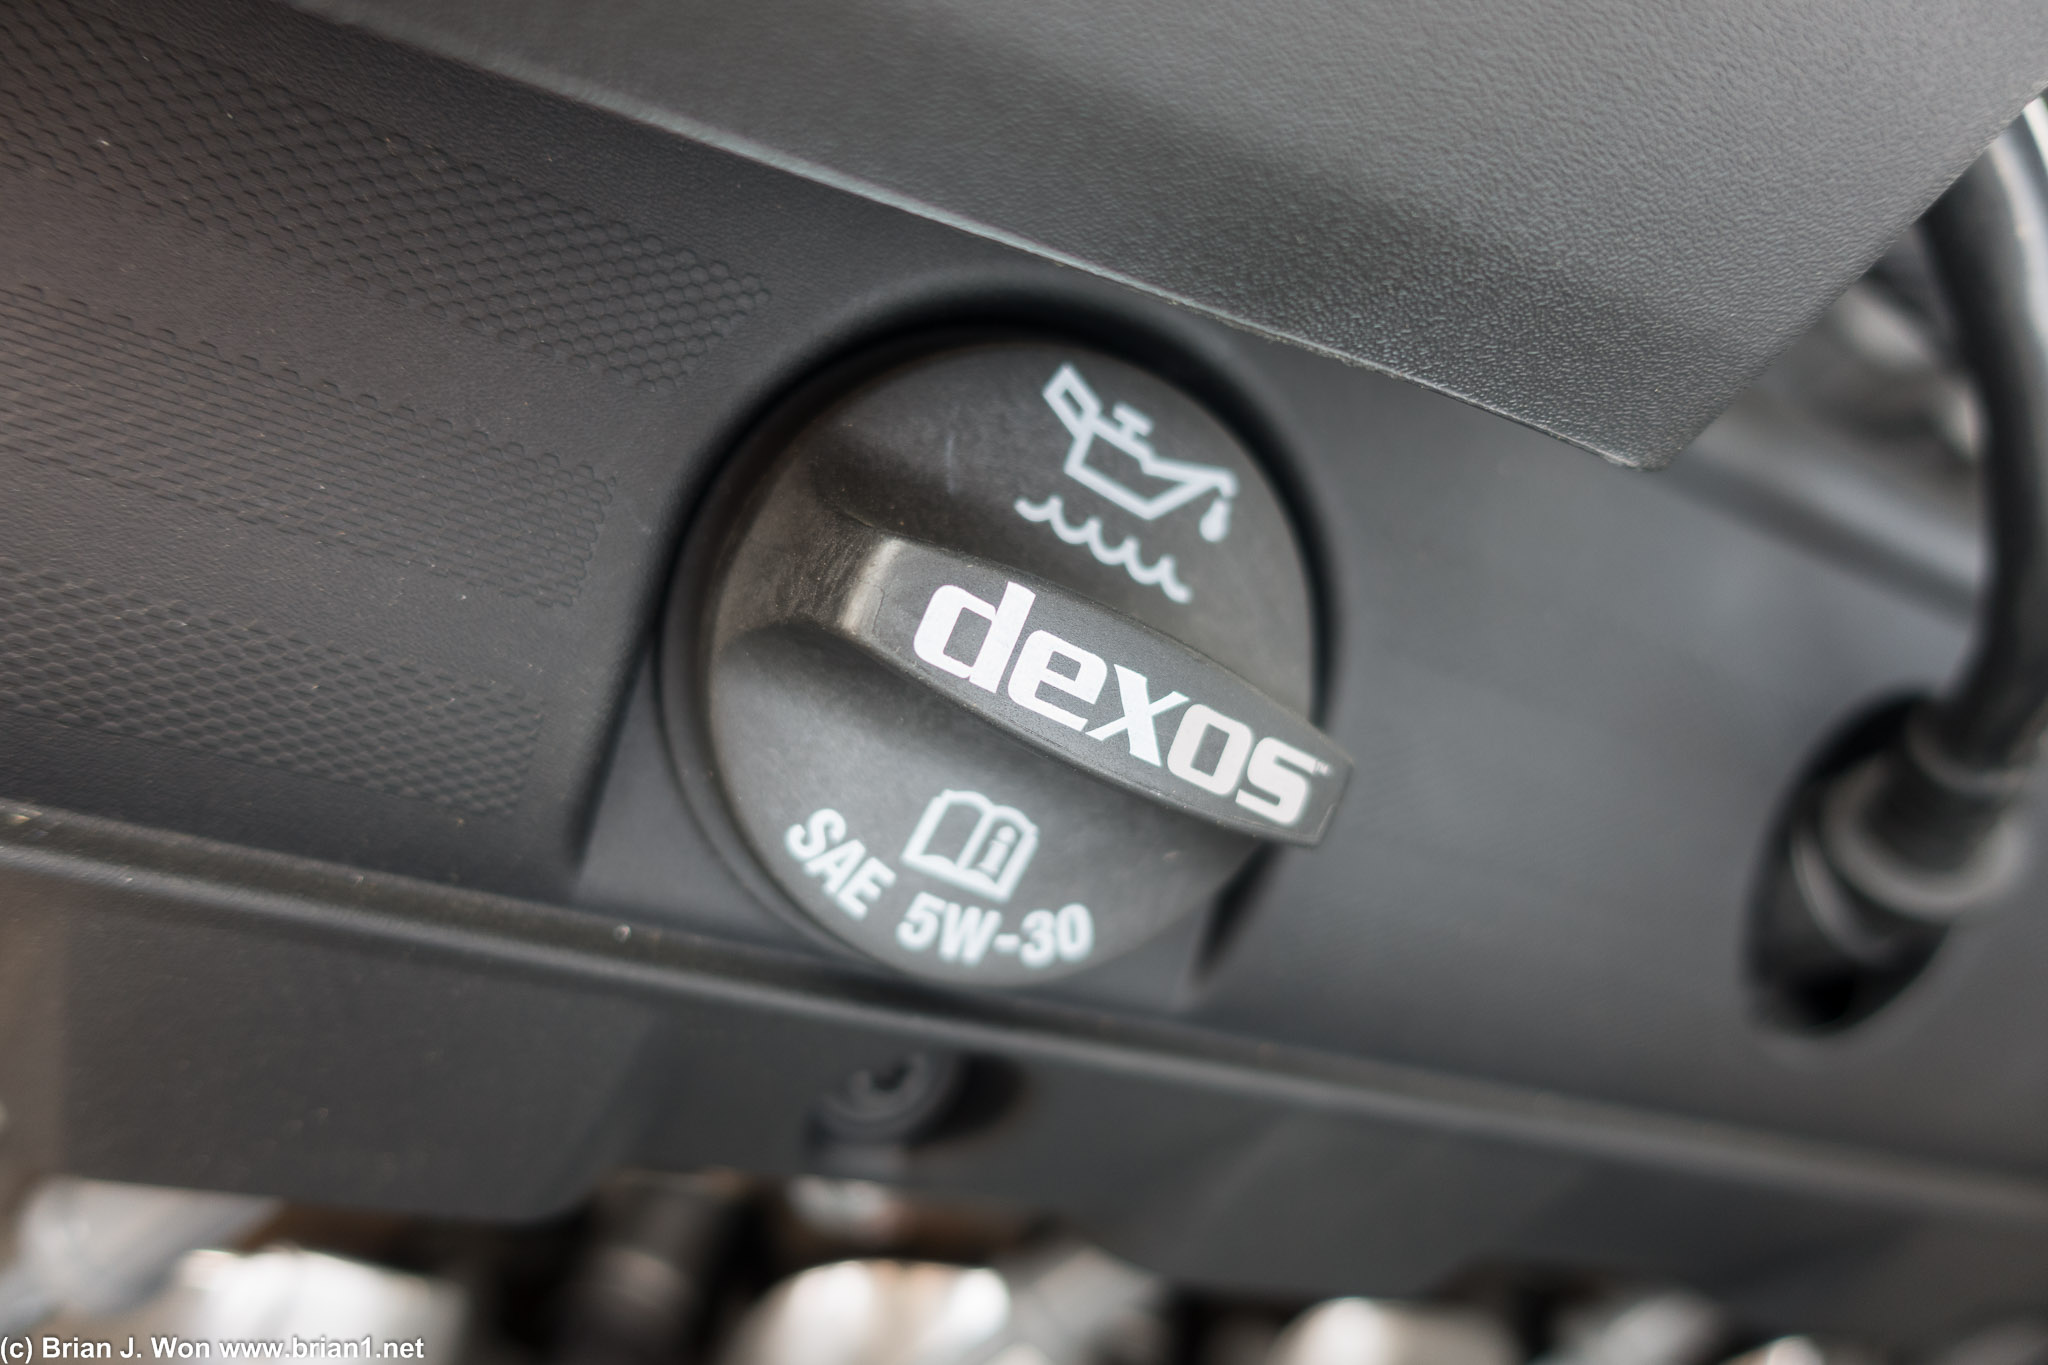 GM's stupid "Dexos" oil certification money-grab. And wow, surprised it's 5W-30 and not 0W-20.